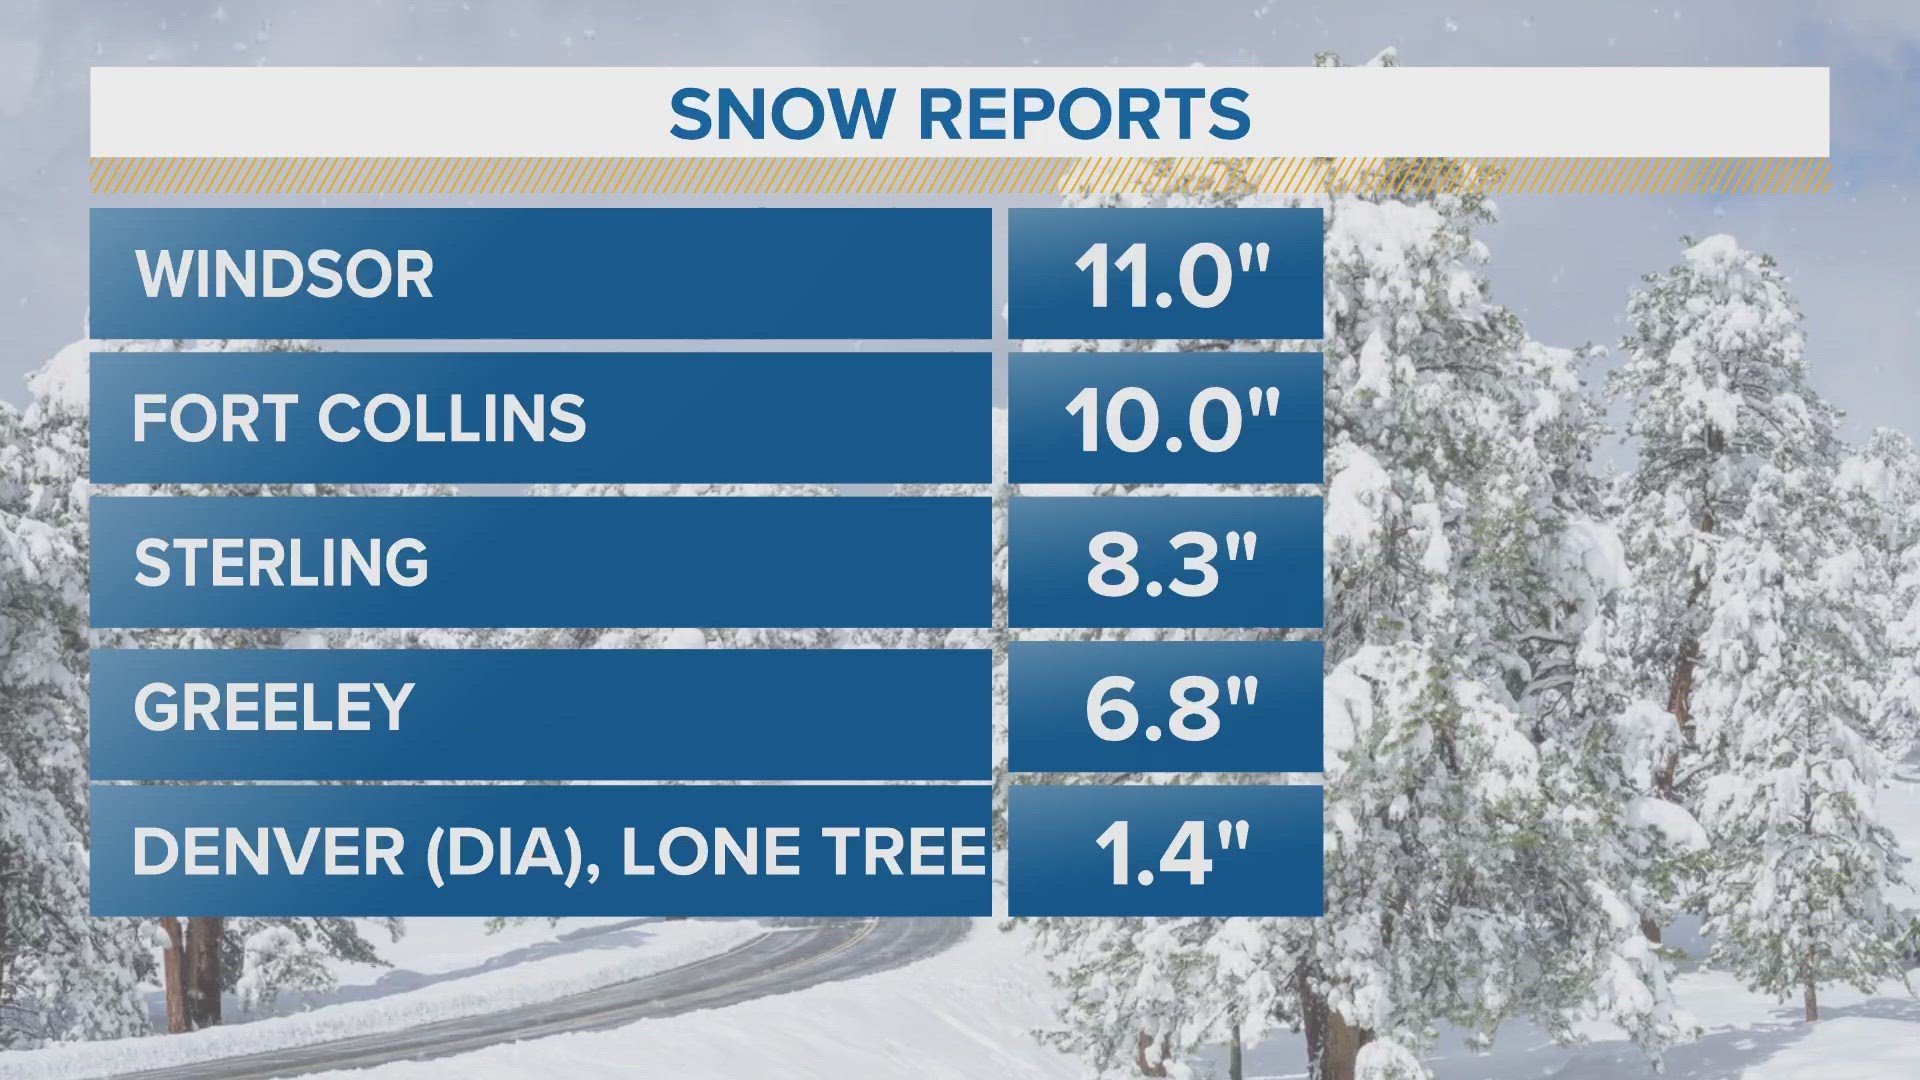 Fort Collins received a foot of snow overnight and into this morning, making it their biggest snowstorm in years.